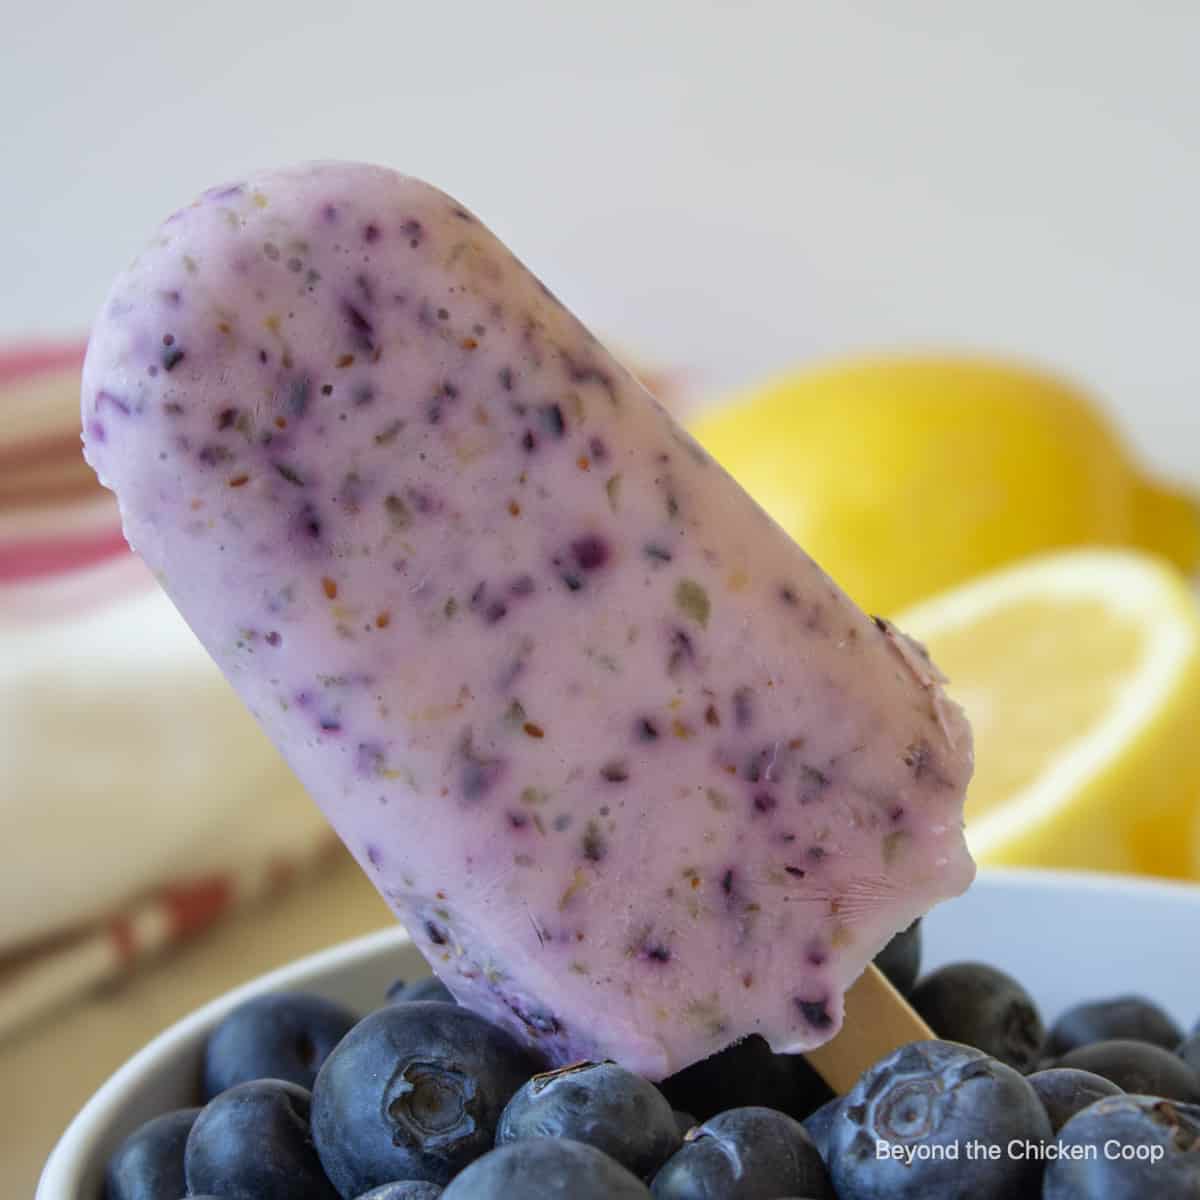 A frozen blueberry popsicle on a wooden stick.